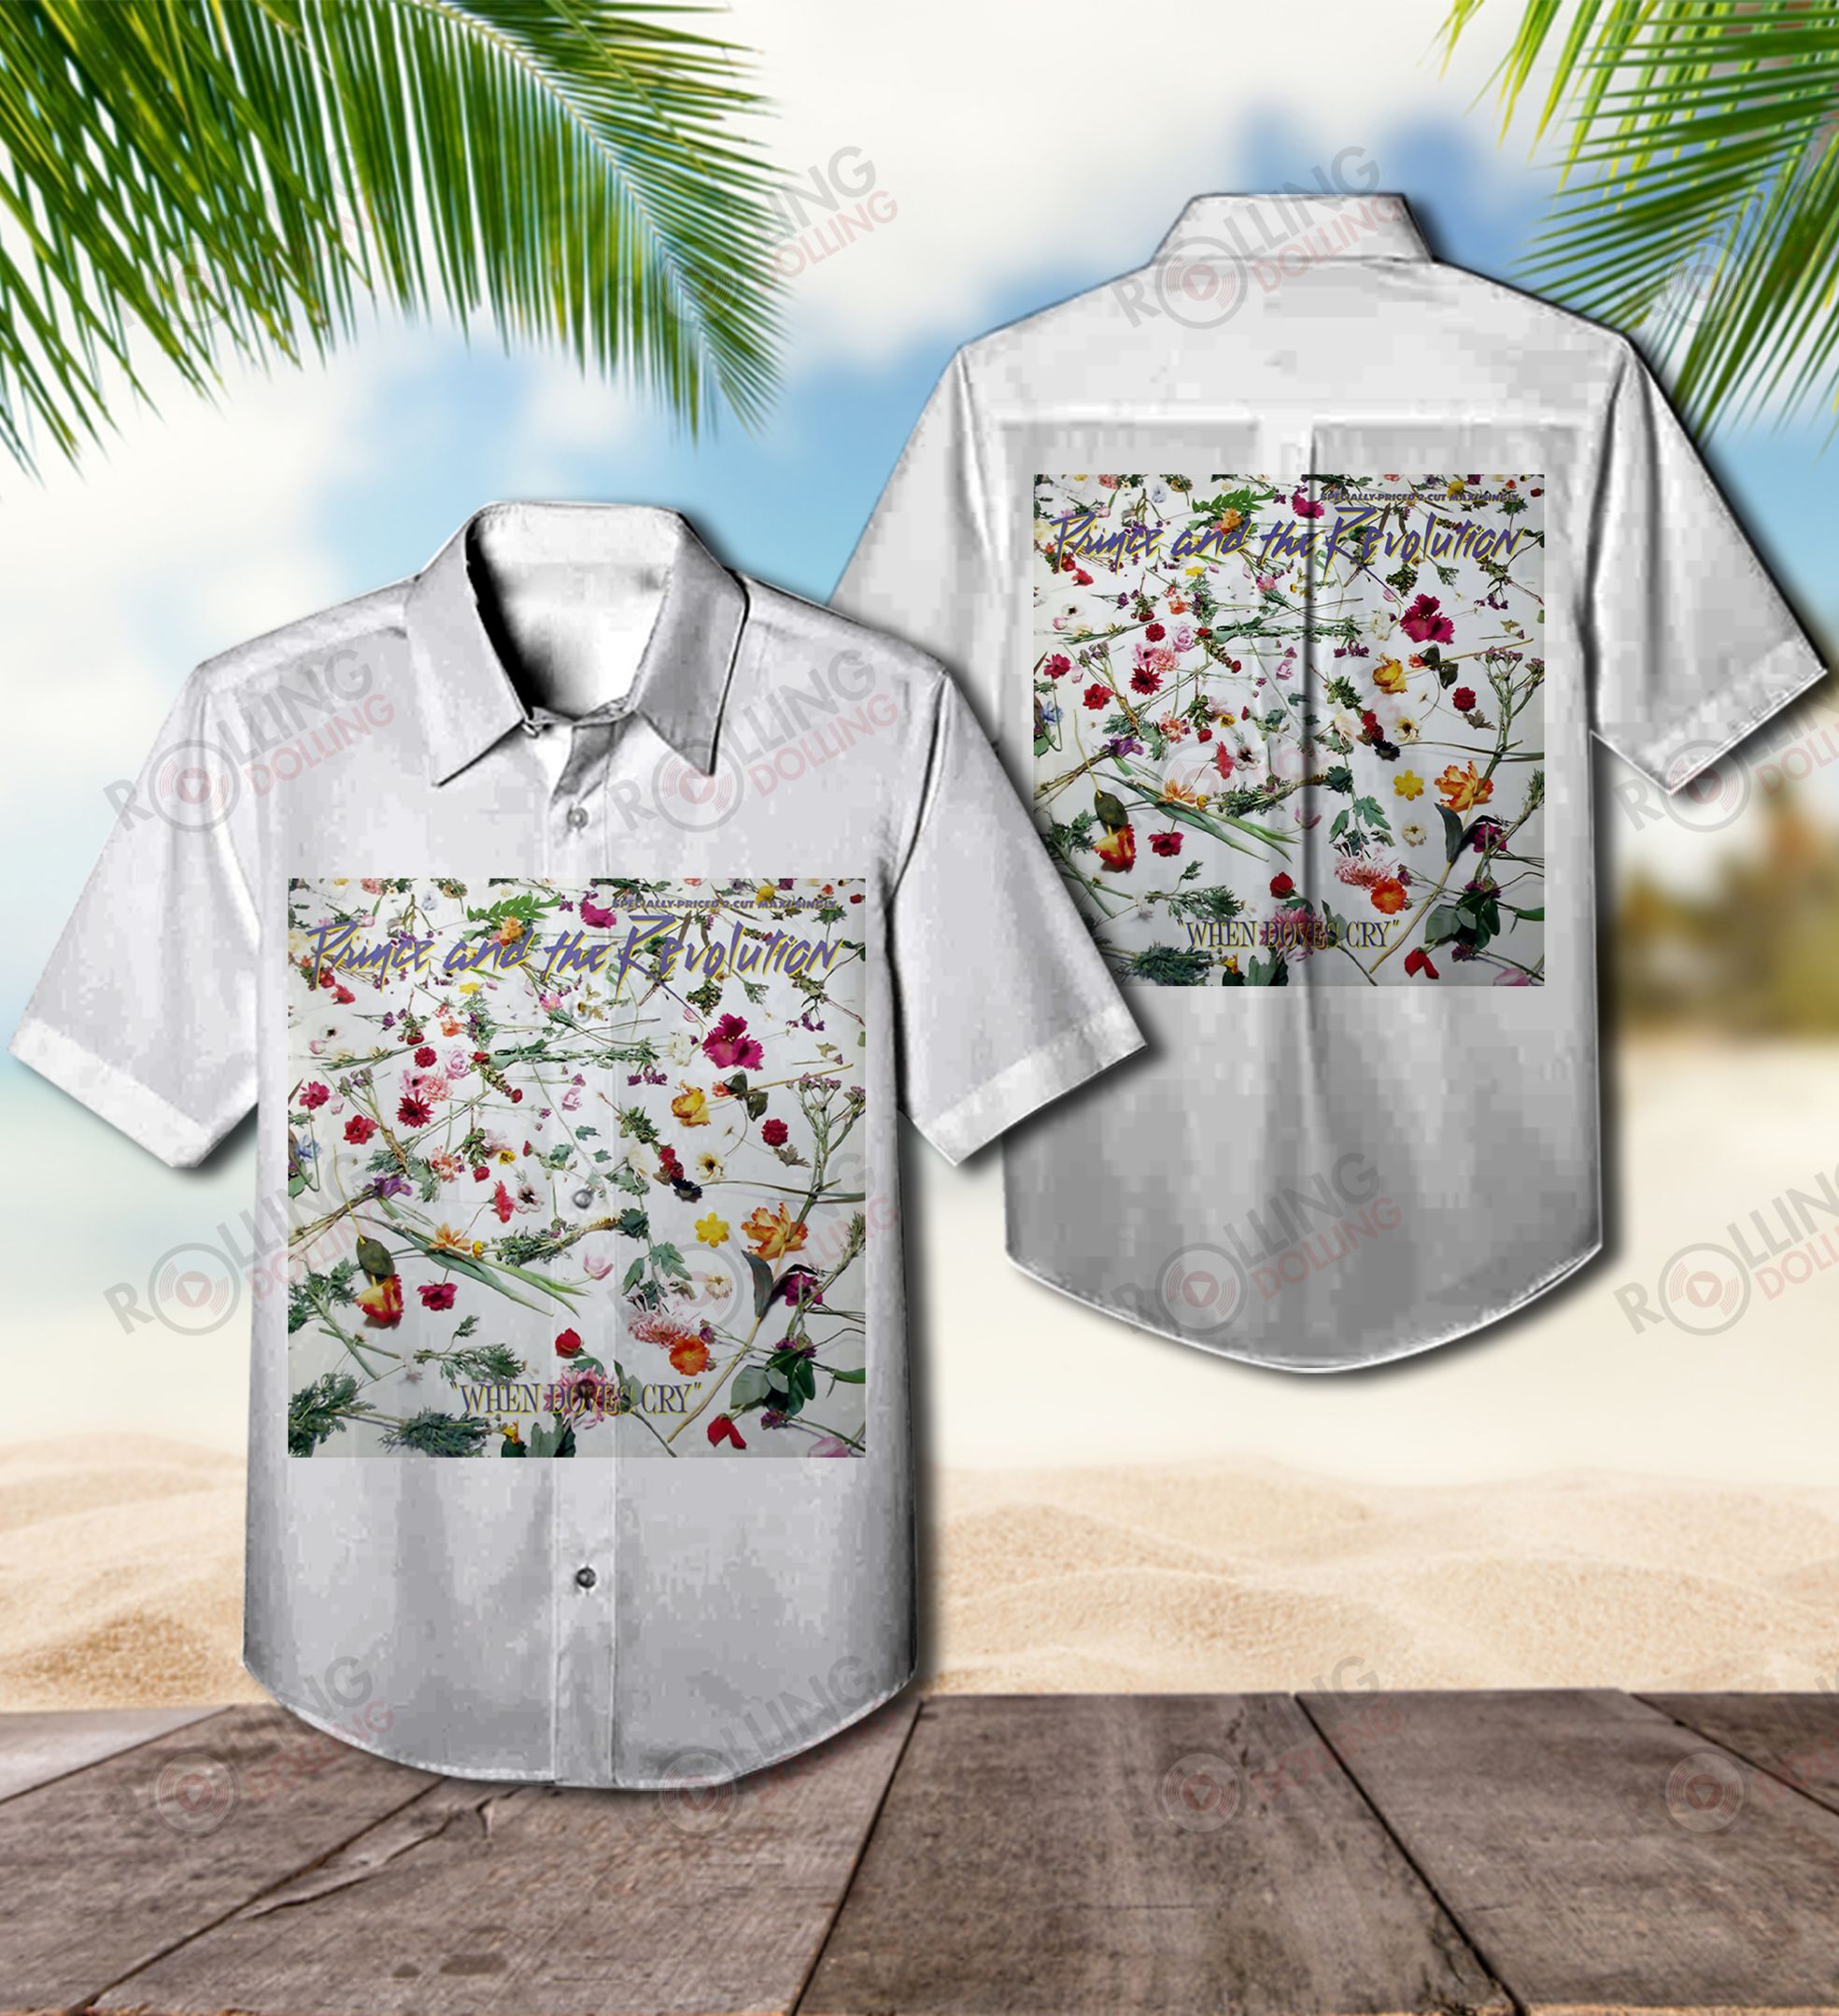 These Hawaiian Shirt will be a great choice for any type of occasion 206